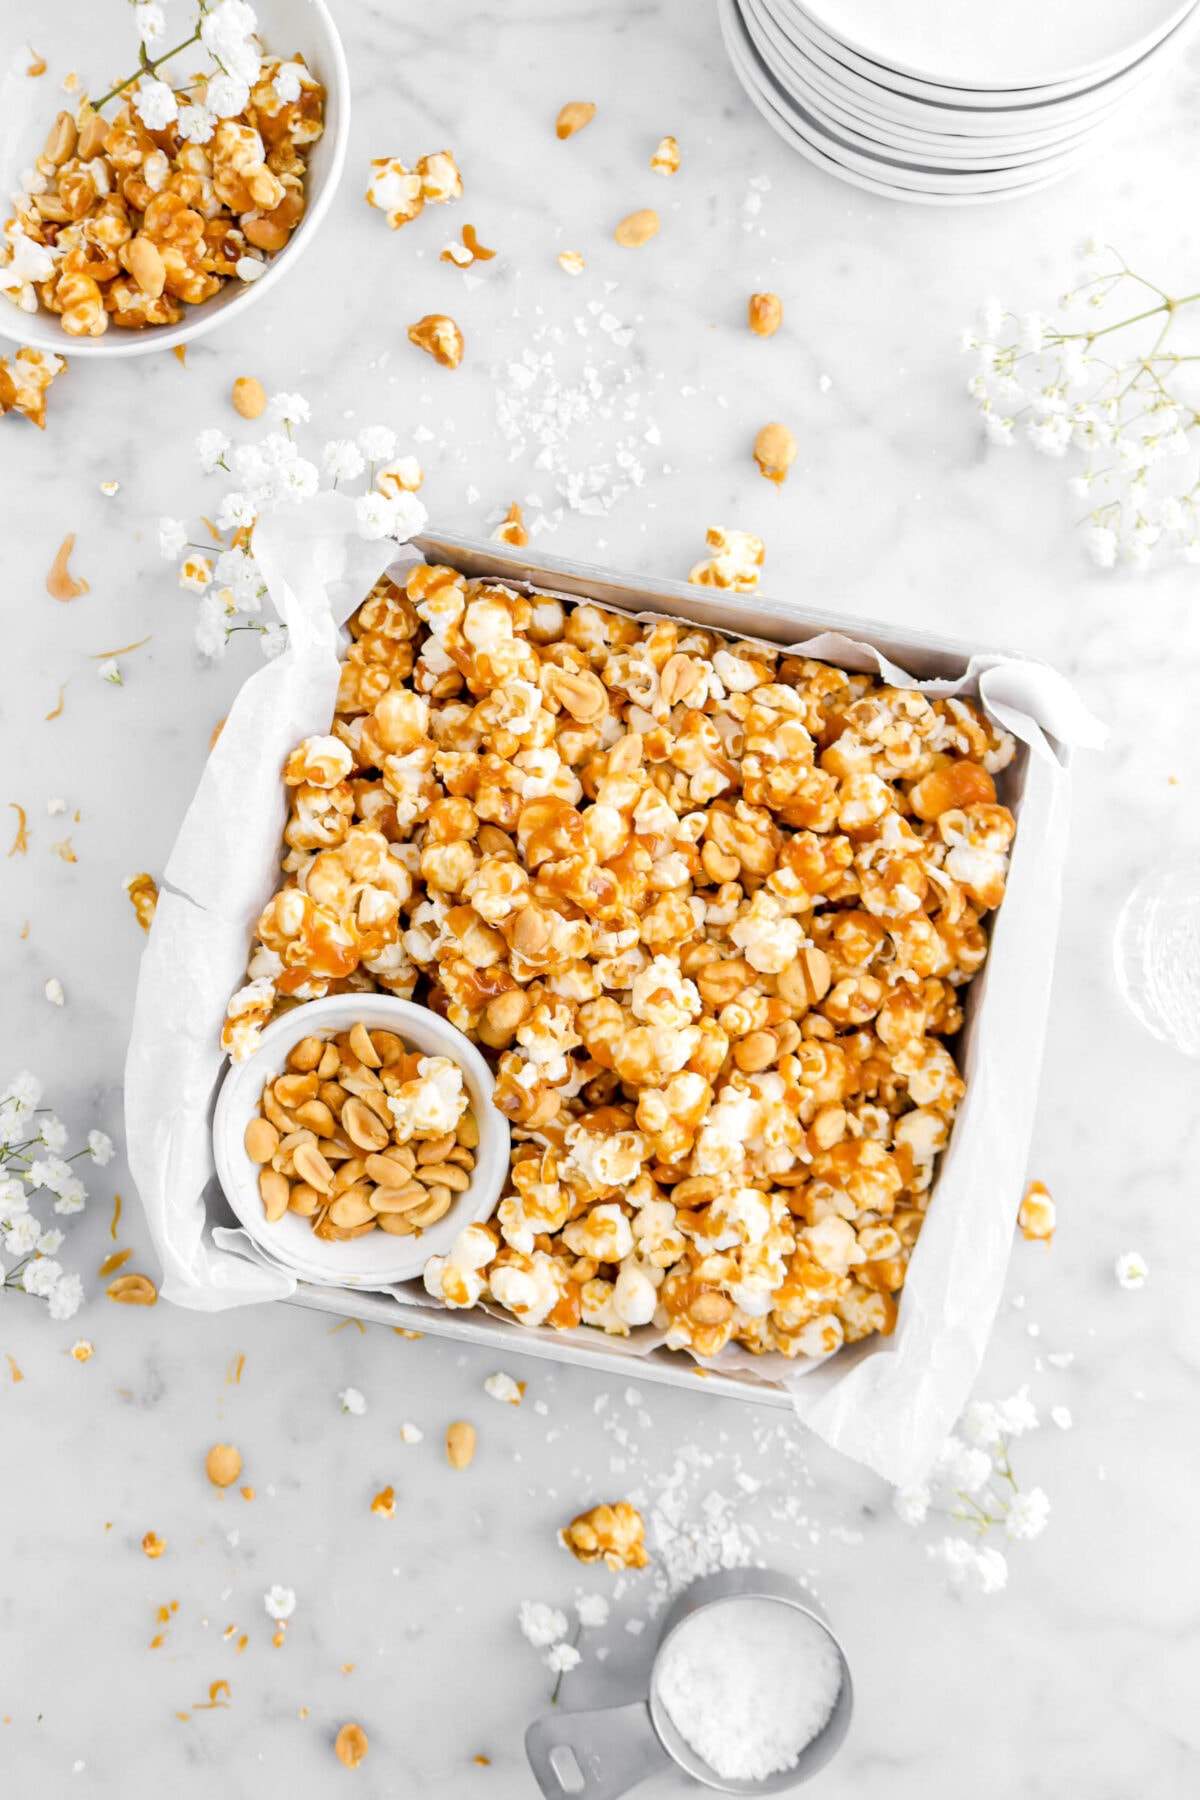 toffee popcorn mix in square pan with bowl of peanuts, peanuts and popcorn scattered around, with flakes salt and small white flowers on marble surface